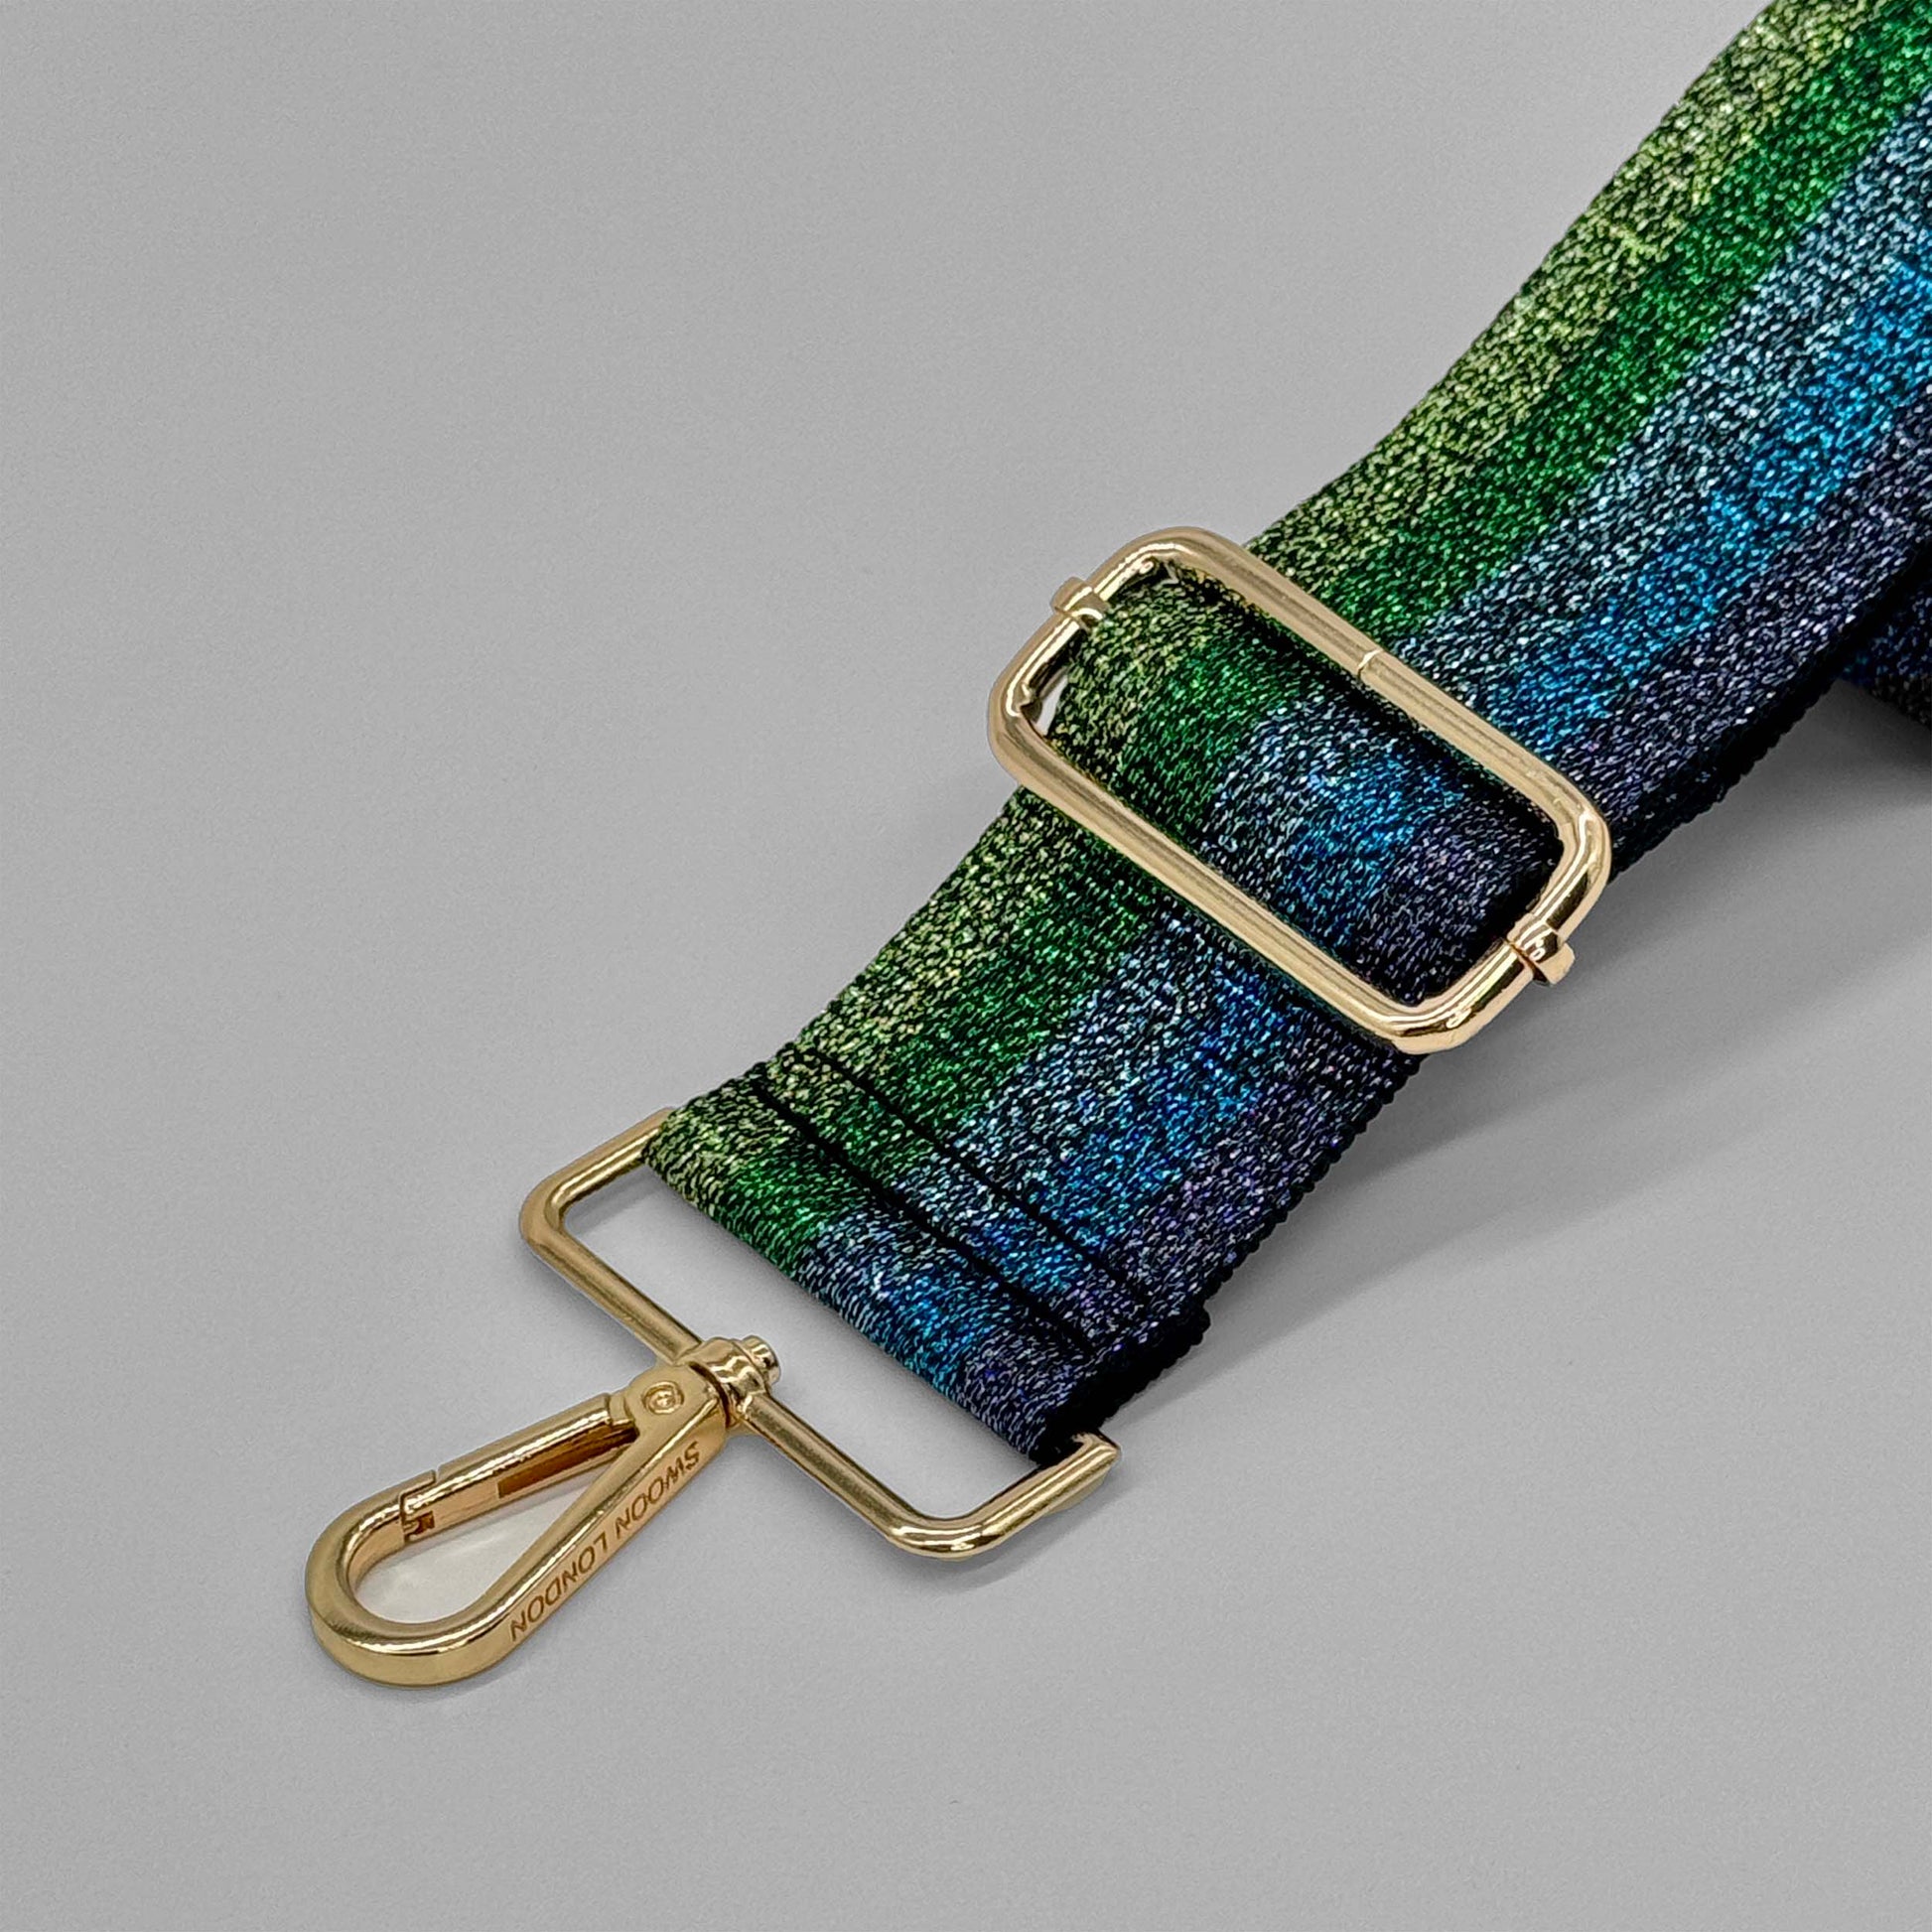 Blue Rainbow Bag Strap by Swoon London